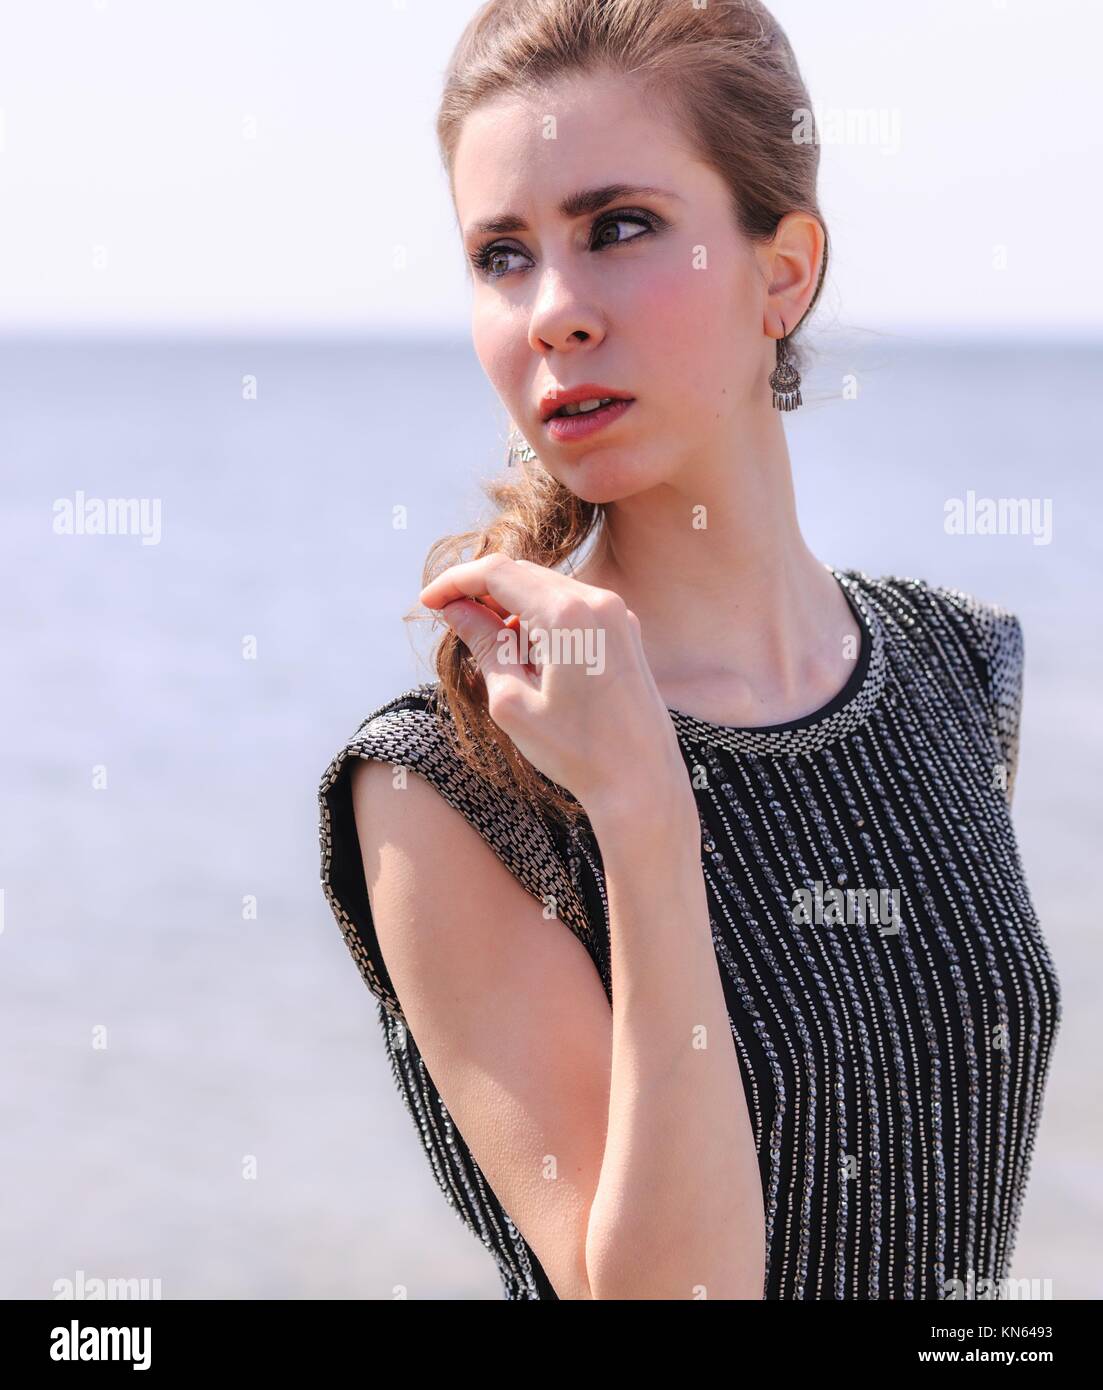 Fashionable woman on shore, she is wearing black dress with a stripes. Stock Photo